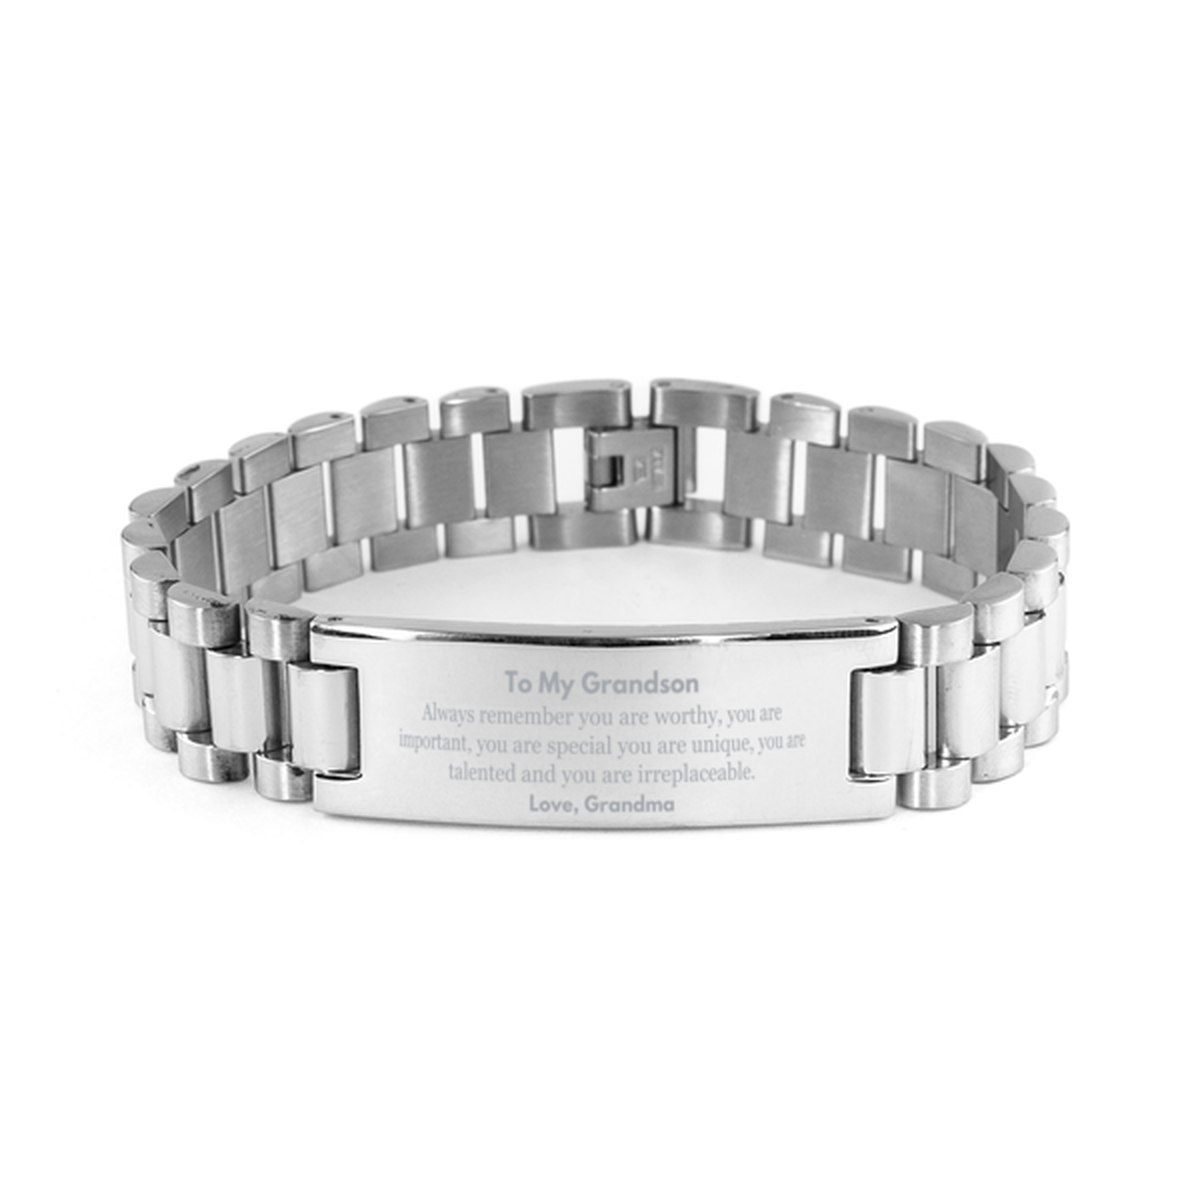 Grandson Birthday Gifts from Grandma, Inspirational Ladder Stainless Steel Bracelet for Grandson Christmas Graduation Gifts for Grandson Always remember you are worthy, you are important. Love, Grandma